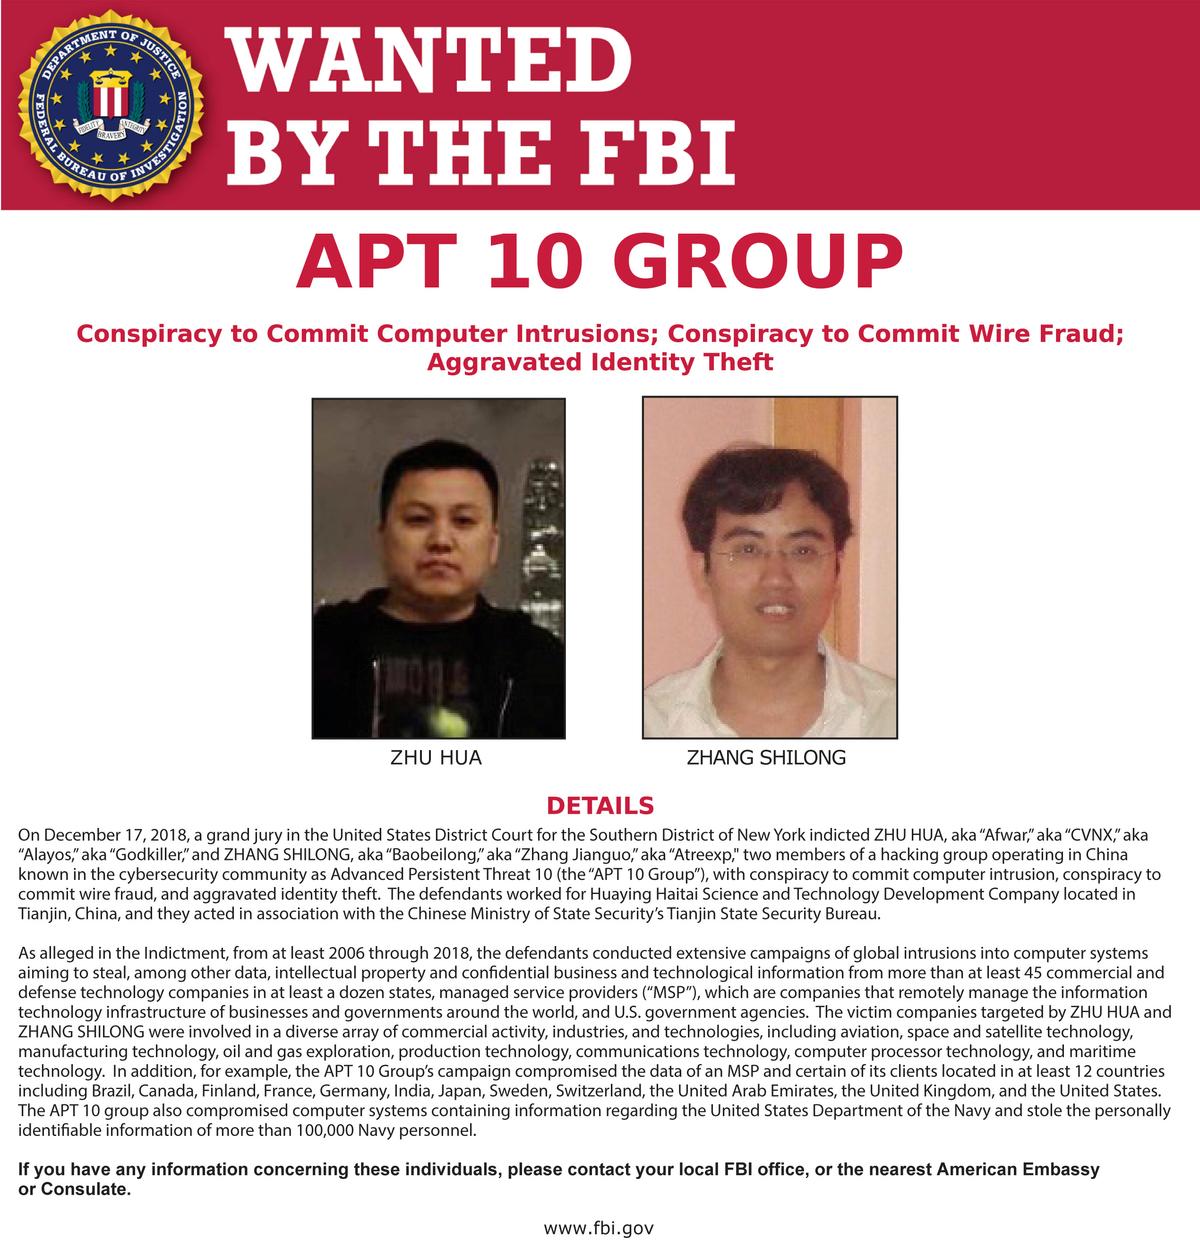 Photographs of Zhu Hua and Zhang Shilong, members of a hacking group in China, appear on a U.S. Federal Bureau of Investigation (FBI) poster on Dec. 21, 2018. (Federal Bureau of Investigation/Handout via Reuters)